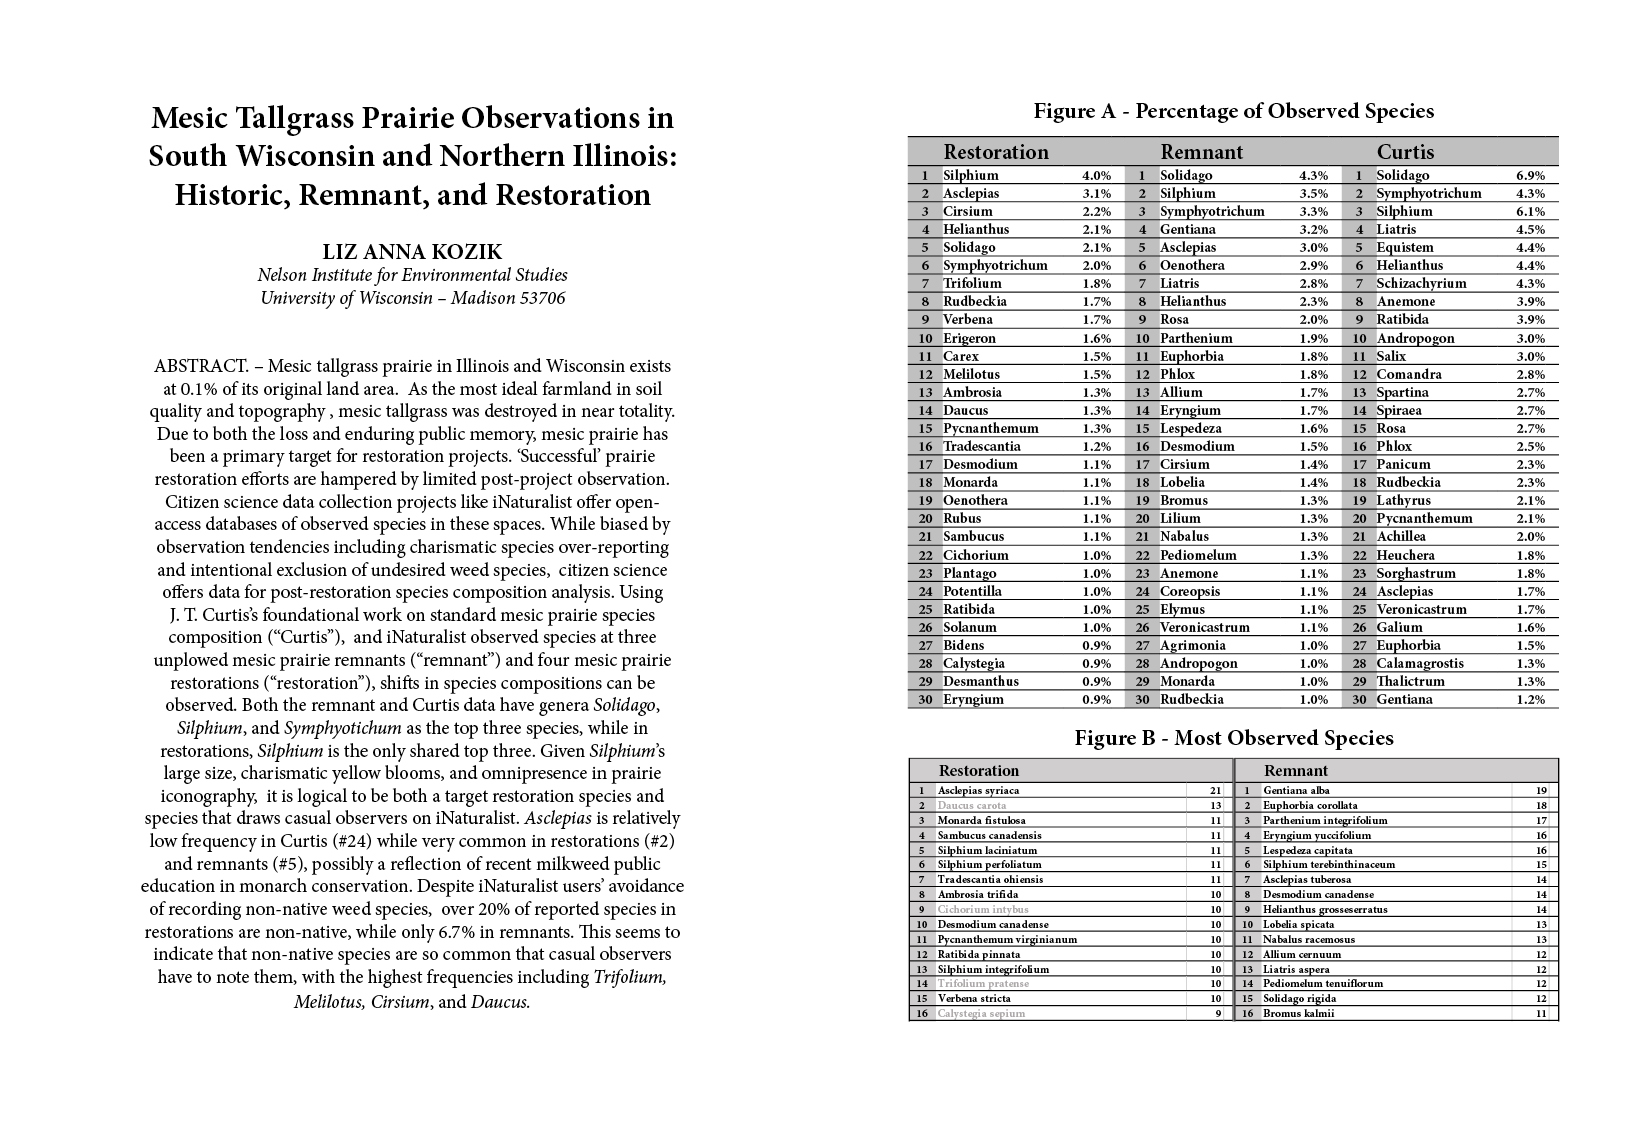 Author's abstract, titled Mesic Tallgrass Prairie Observations in South Wisconsin and Northern Illinois: Historic, Remnant, and Restoration. Next to it, a table listing percentages of observed and most observed plant species in these prairies.